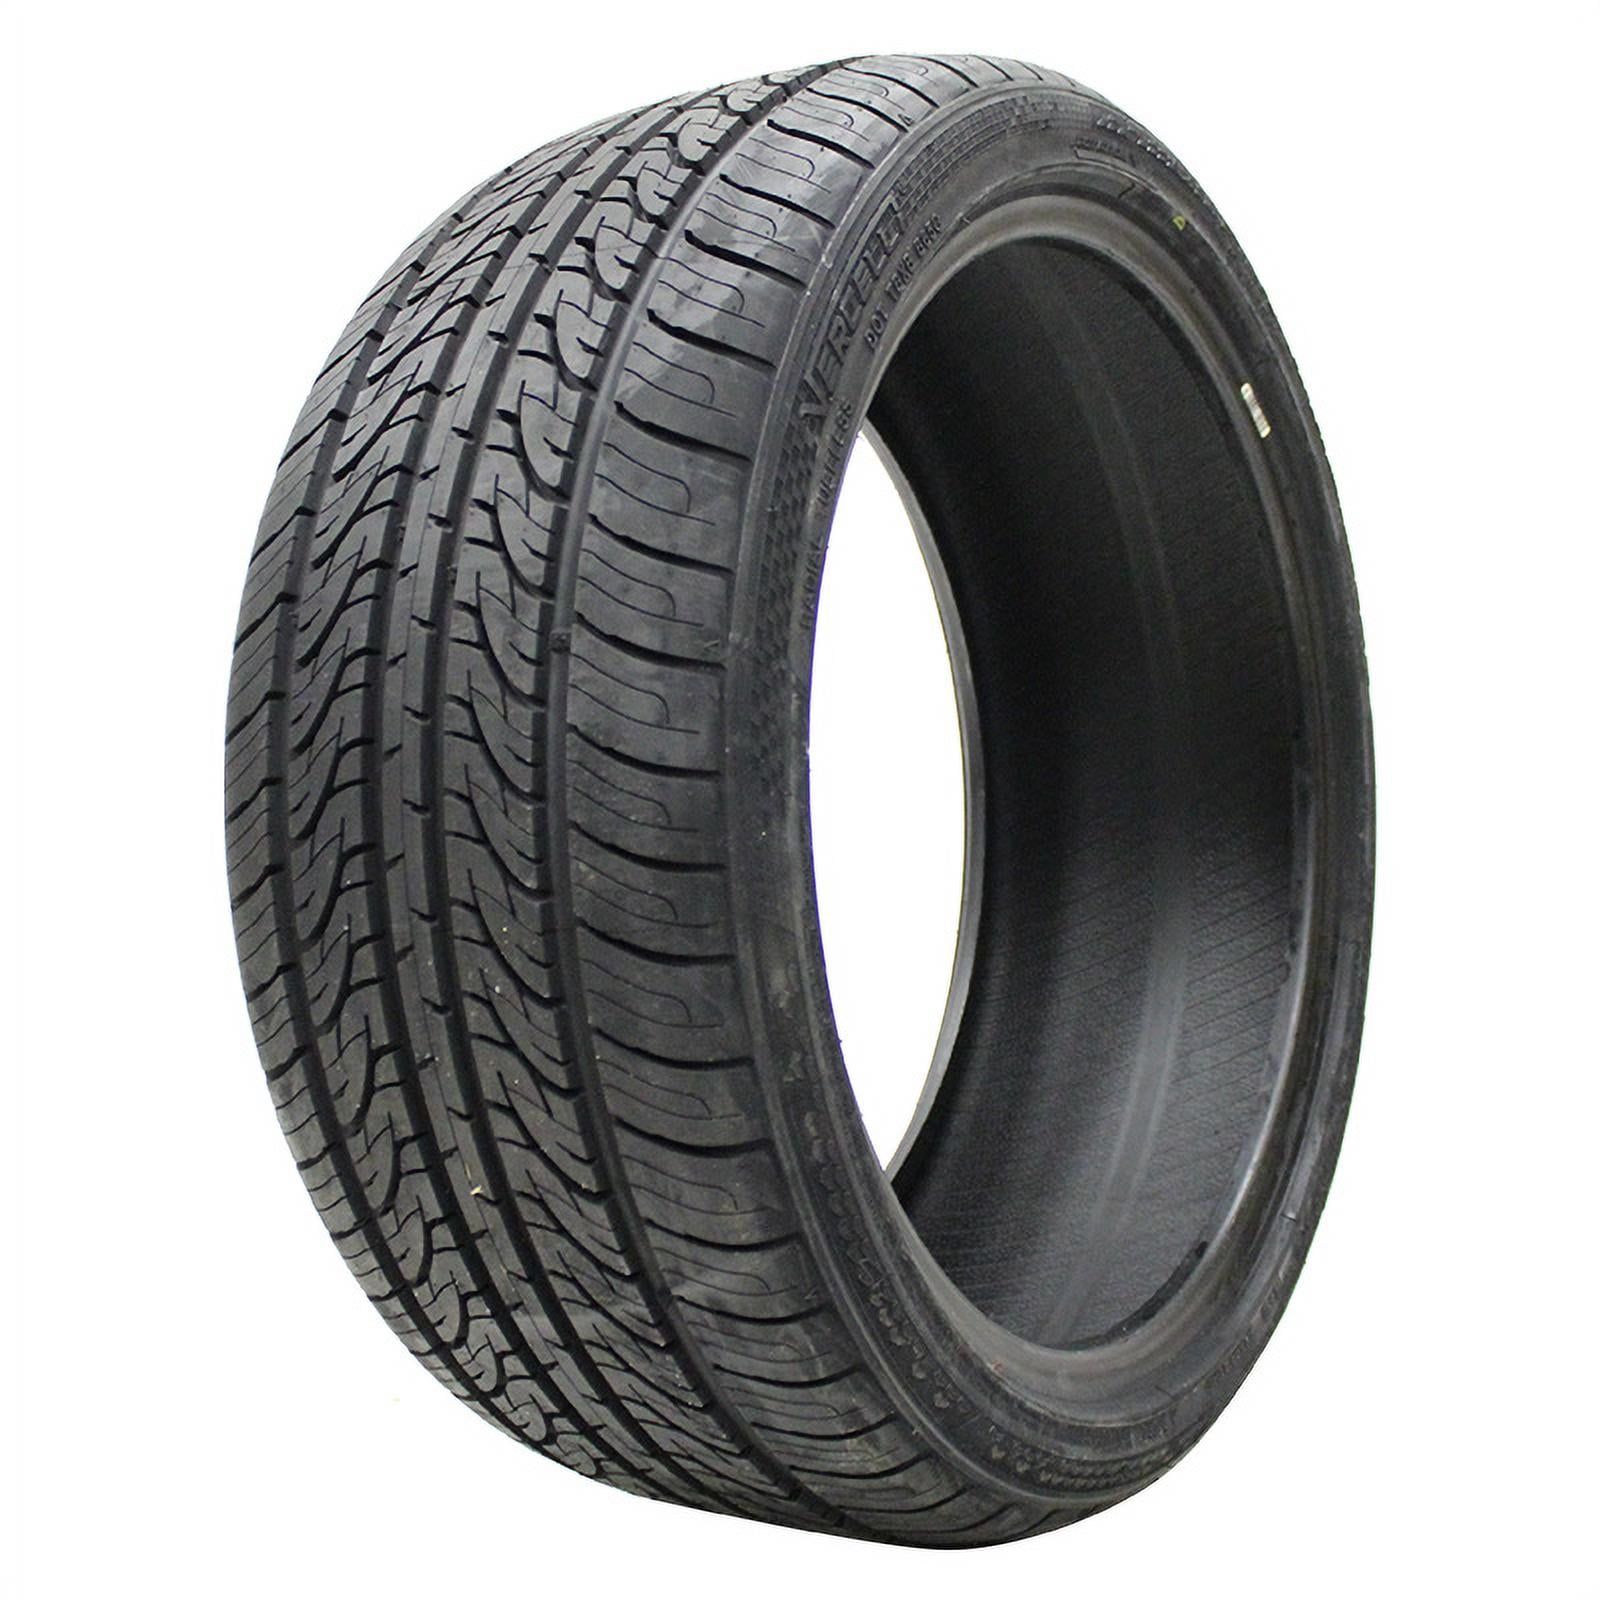 TYRE ACCELERA ACCELERA PHI R 225 35 R18 87Y SUMMER TL XL FOR CARS 